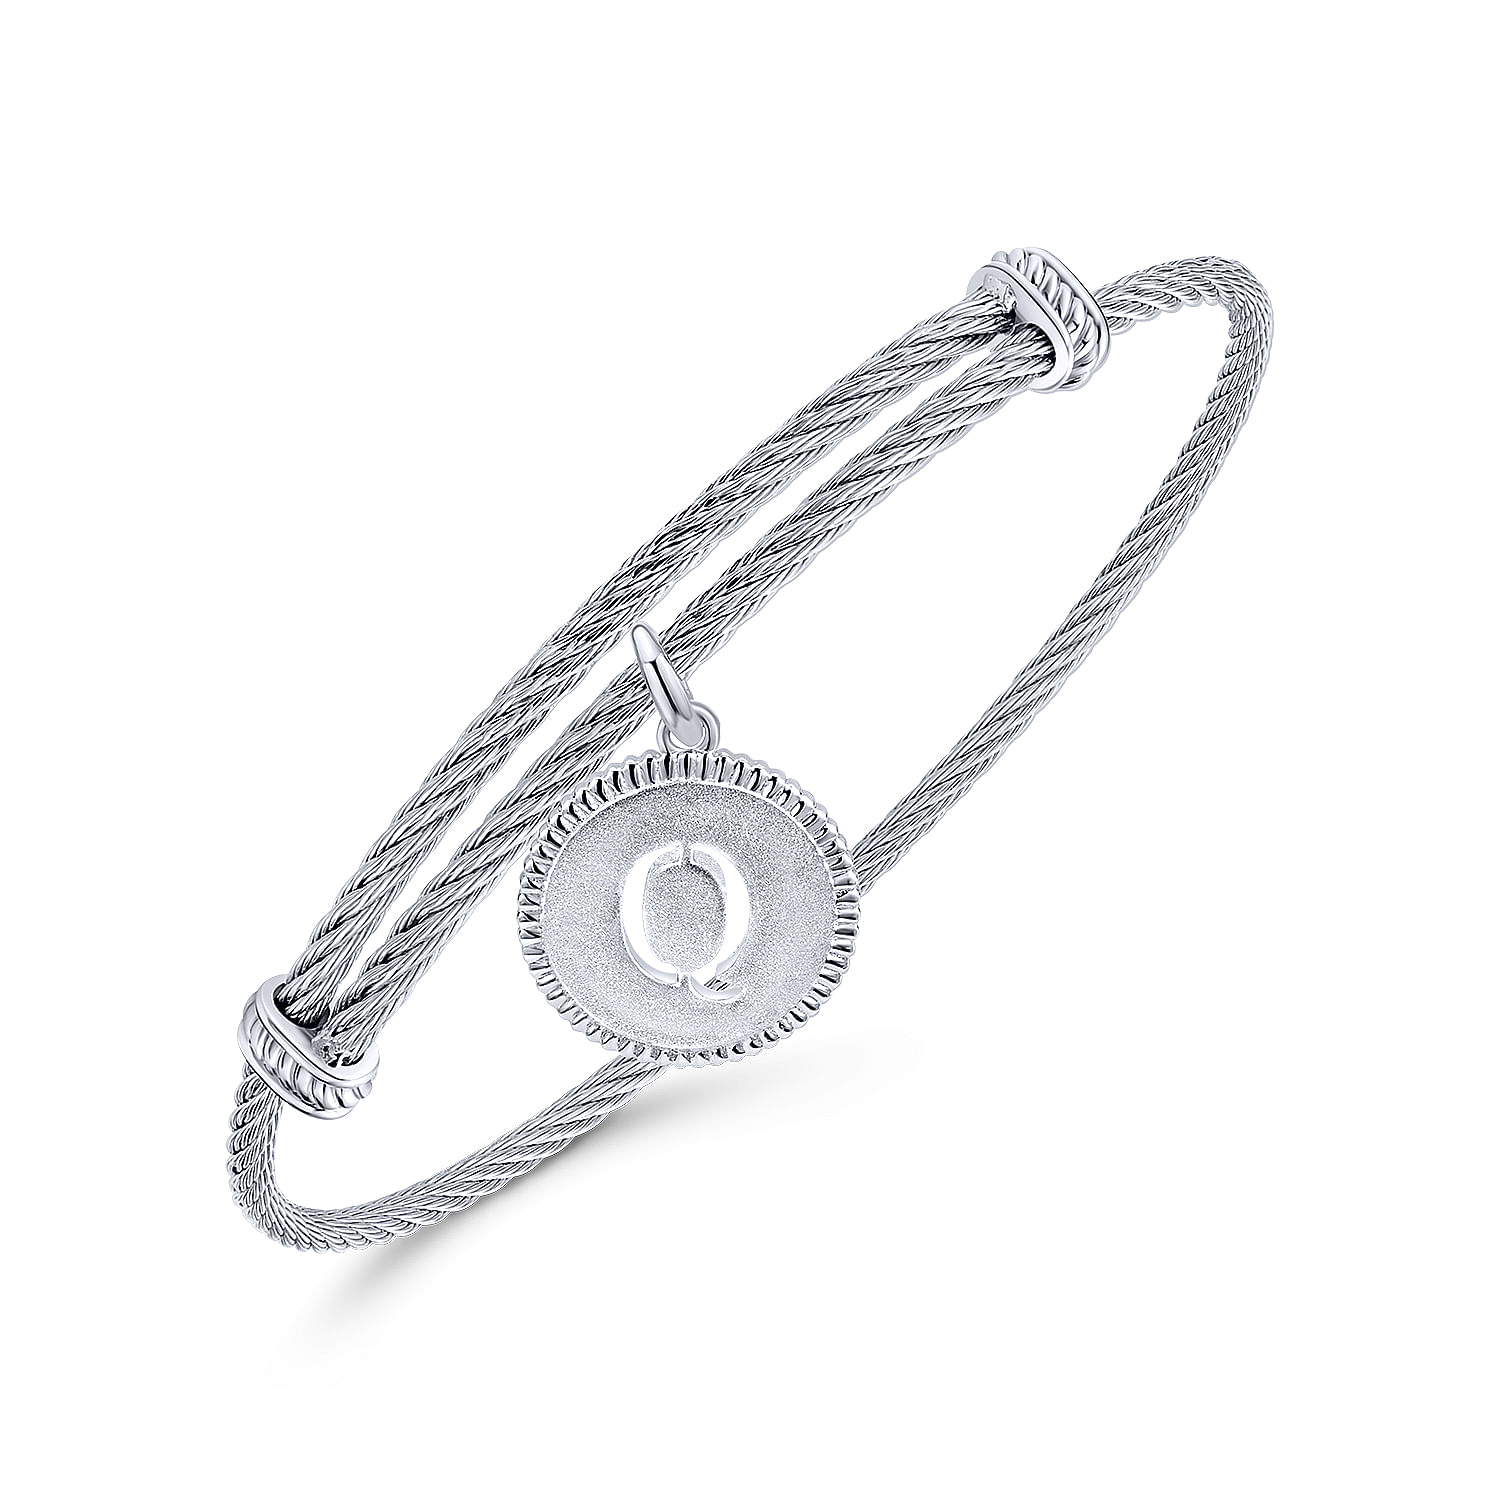 Adjustable Twisted Cable Stainless Steel Bangle with Sterling Silver Q Initial Charm - Shot 2